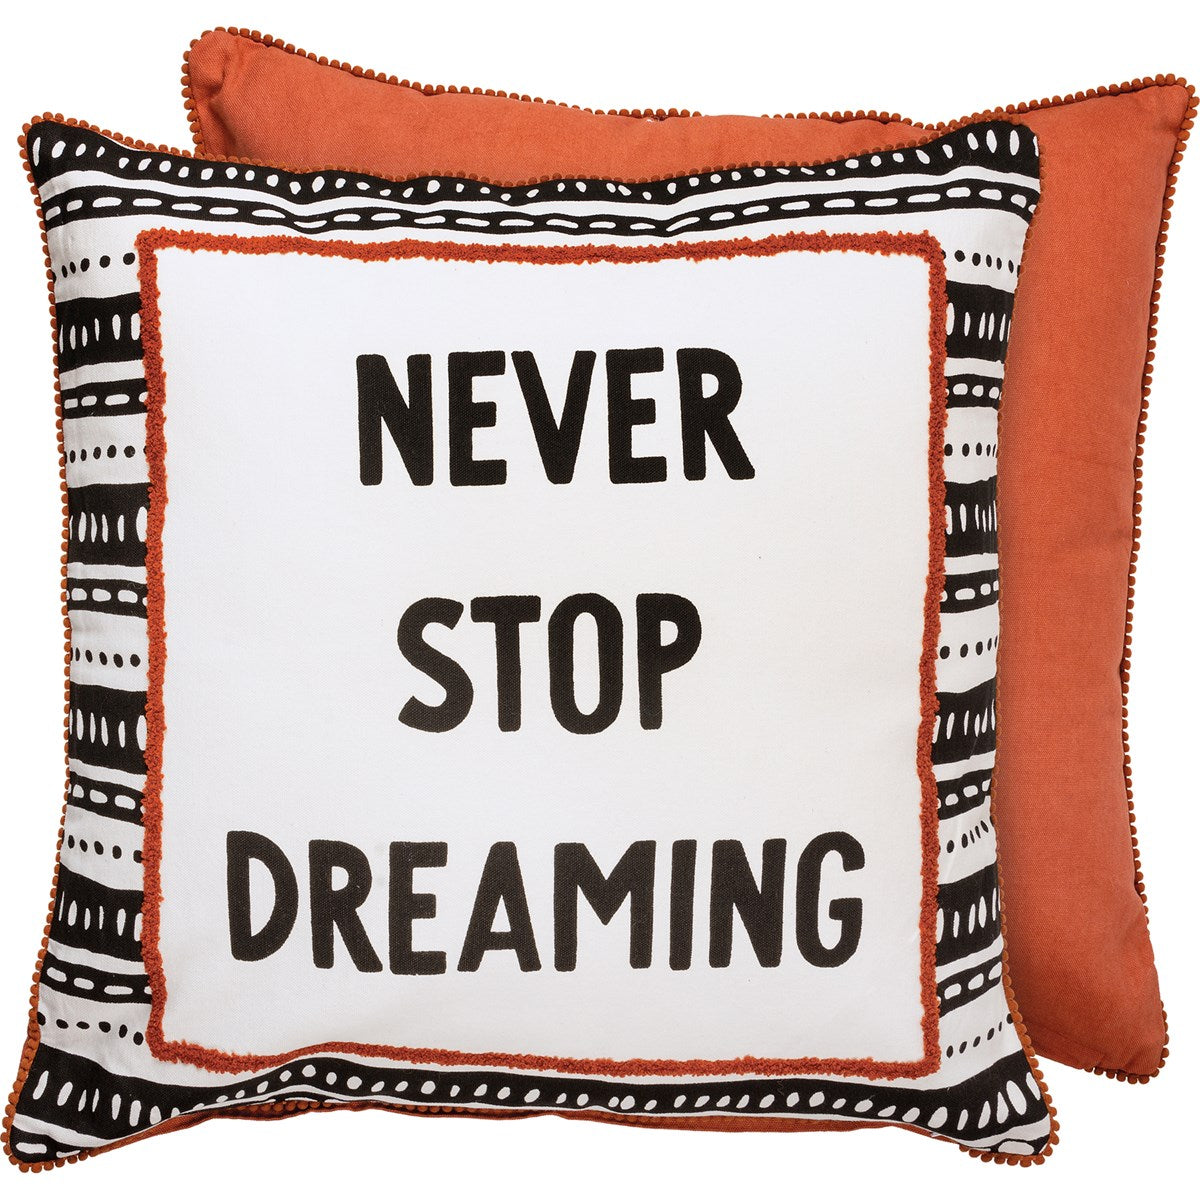 Never Stop Dreaming Pillow